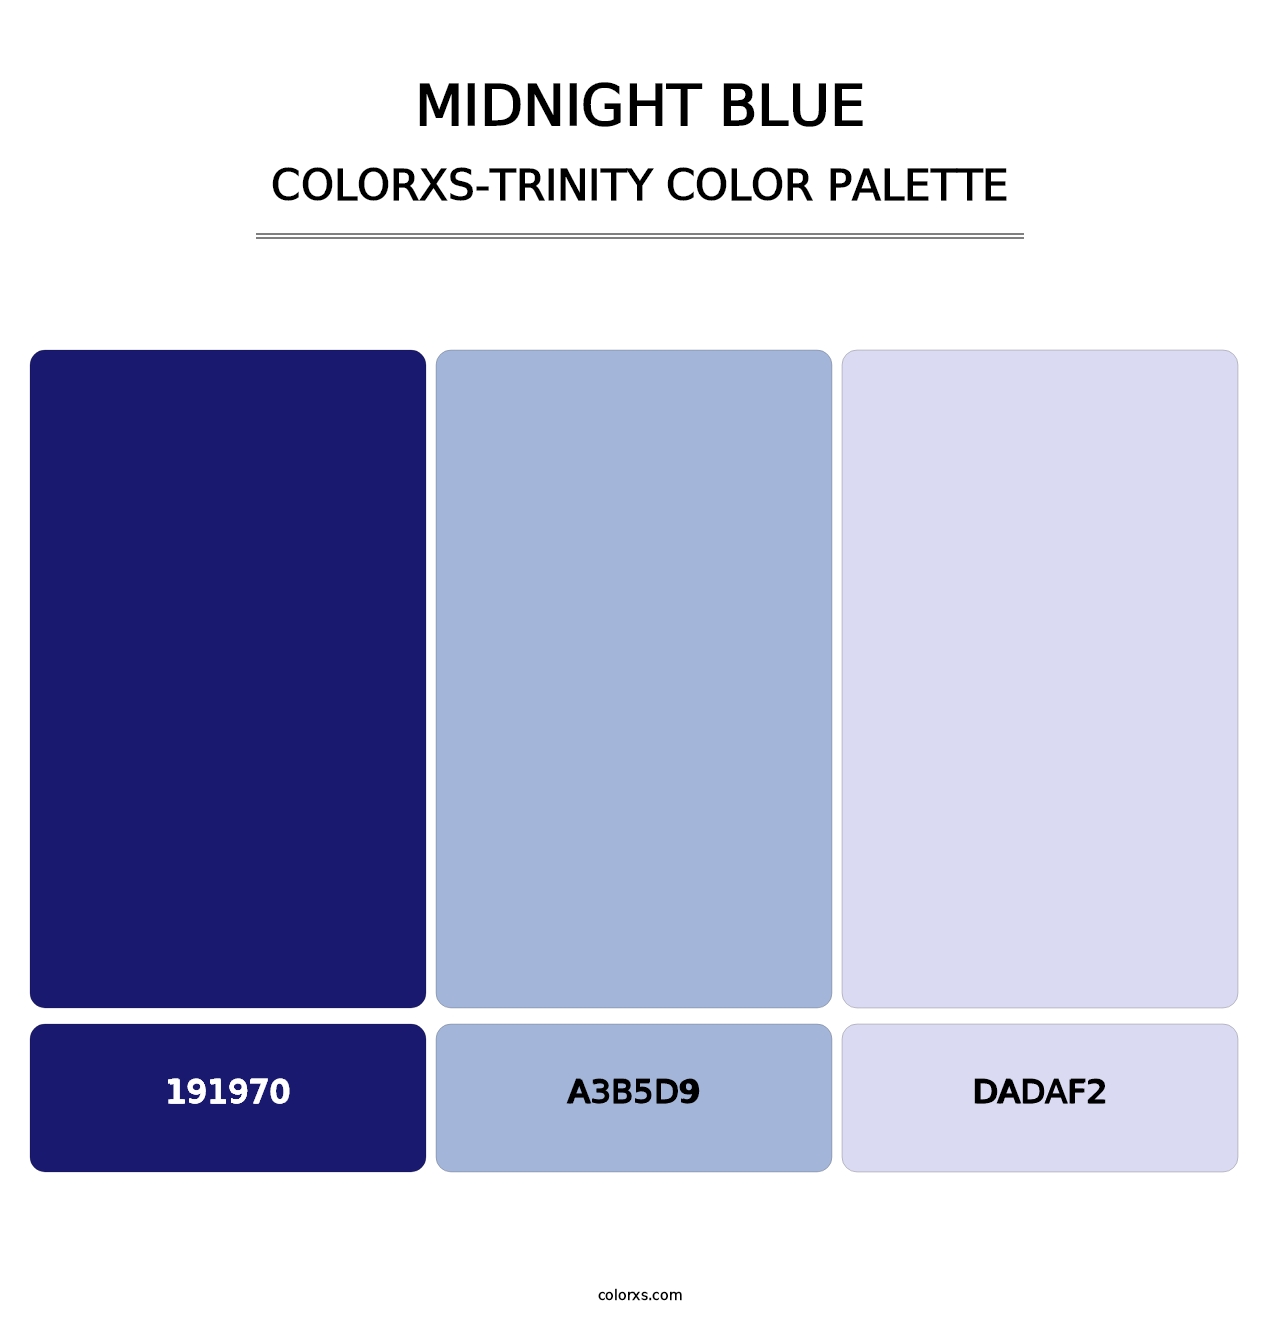 Midnight Blue - Colorxs Trinity Palette